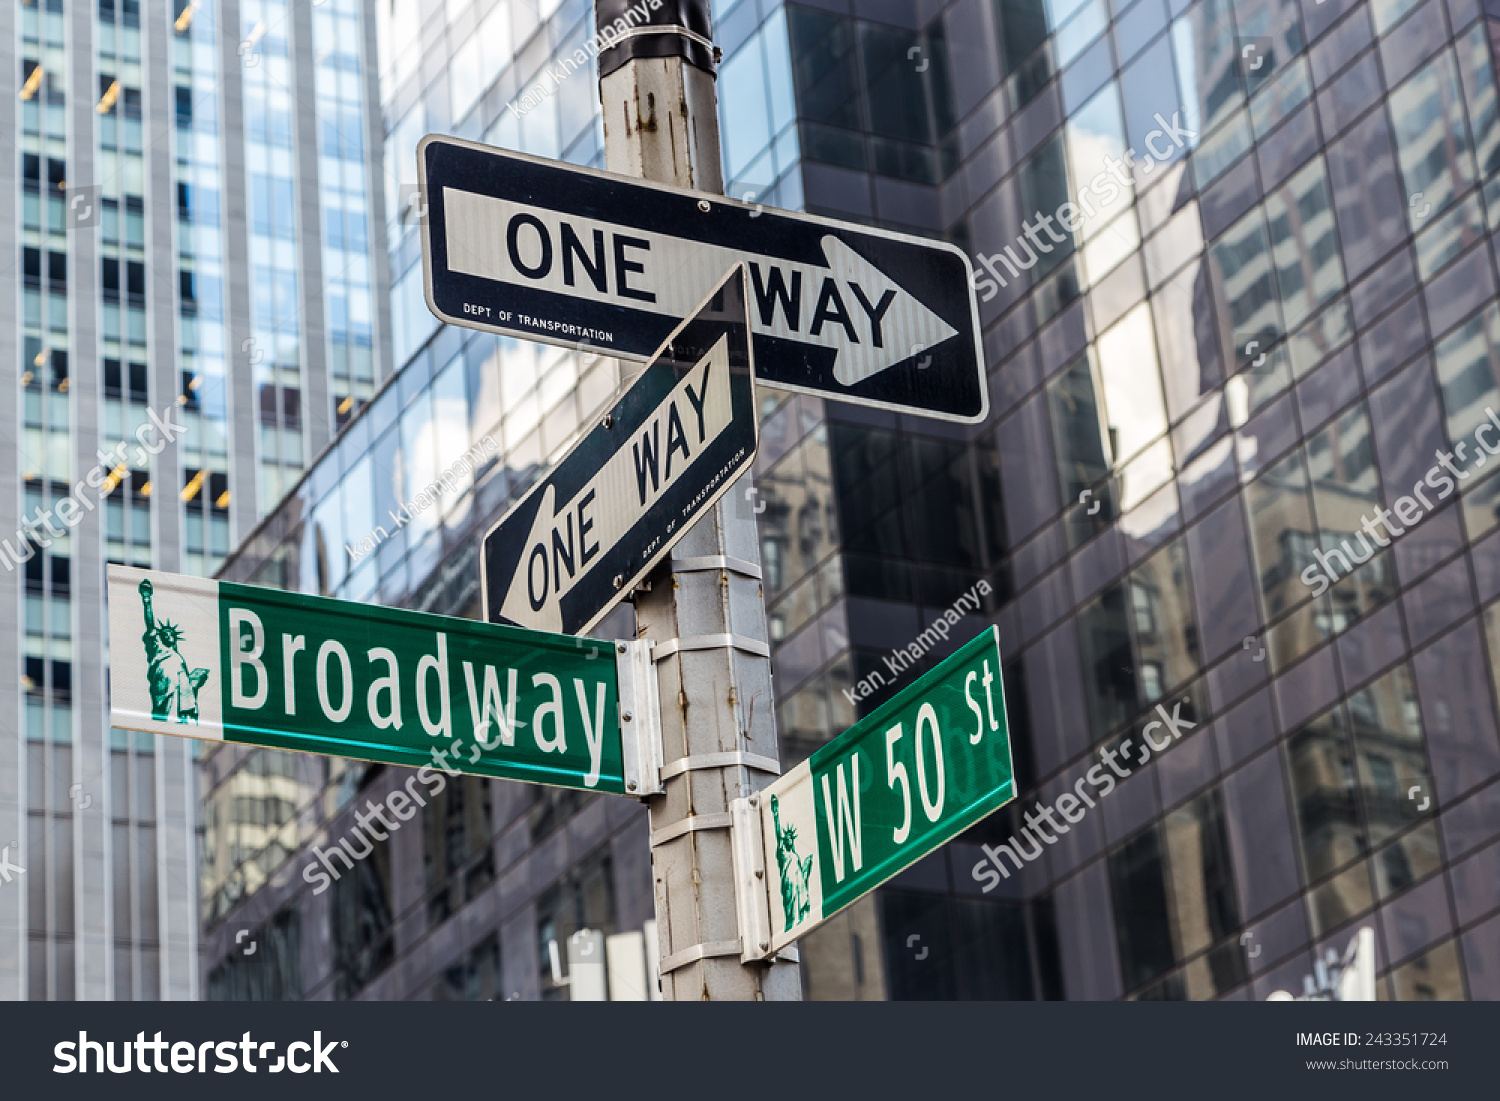 Broadway street sign near Time square in New York City #243351724